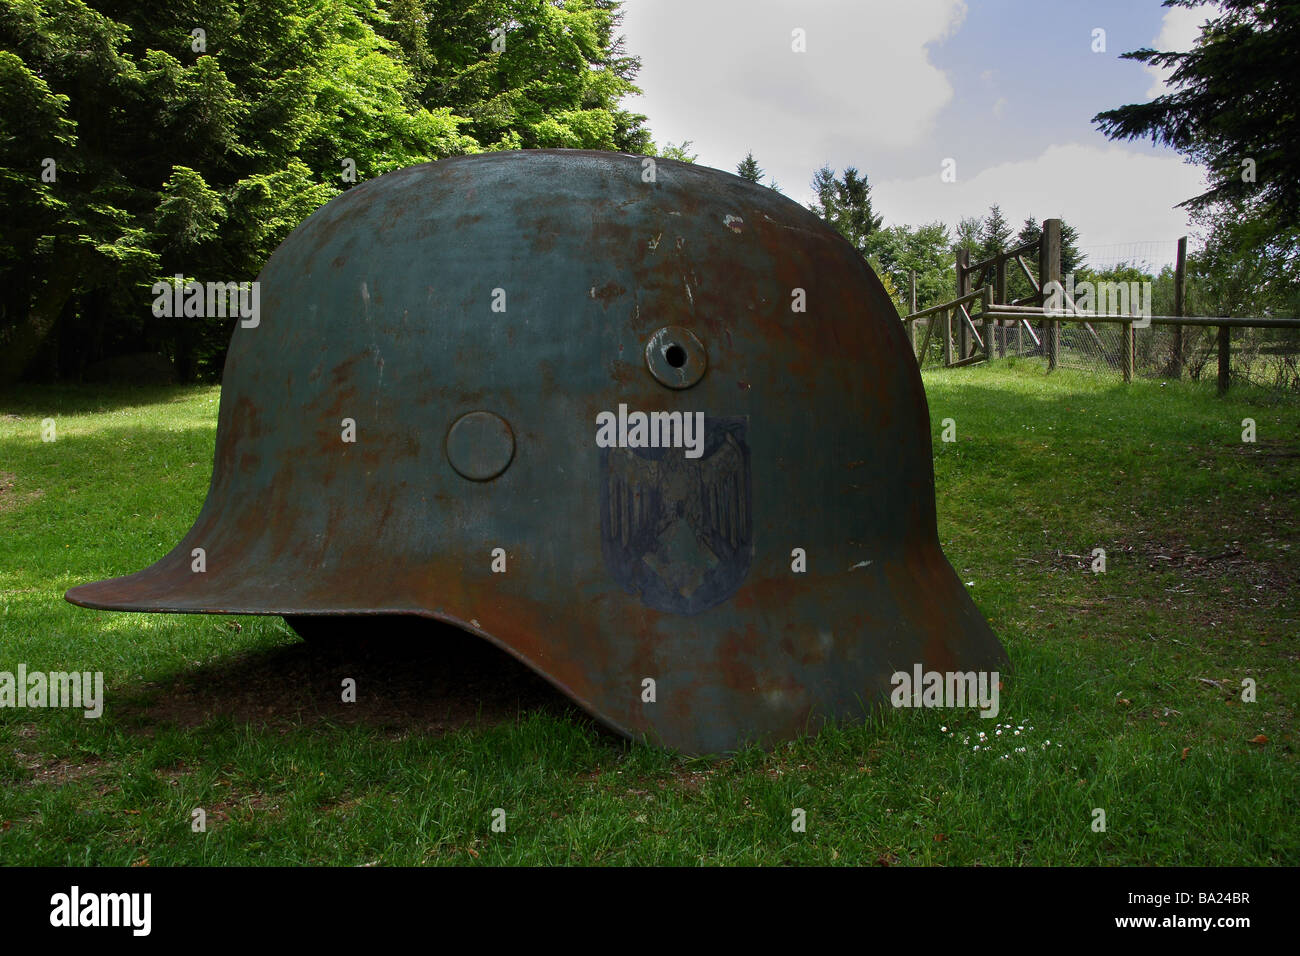 A sculpture of a giant German helmet A gate and fence beyond resembling the entrance of a concentration camp Stock Photo